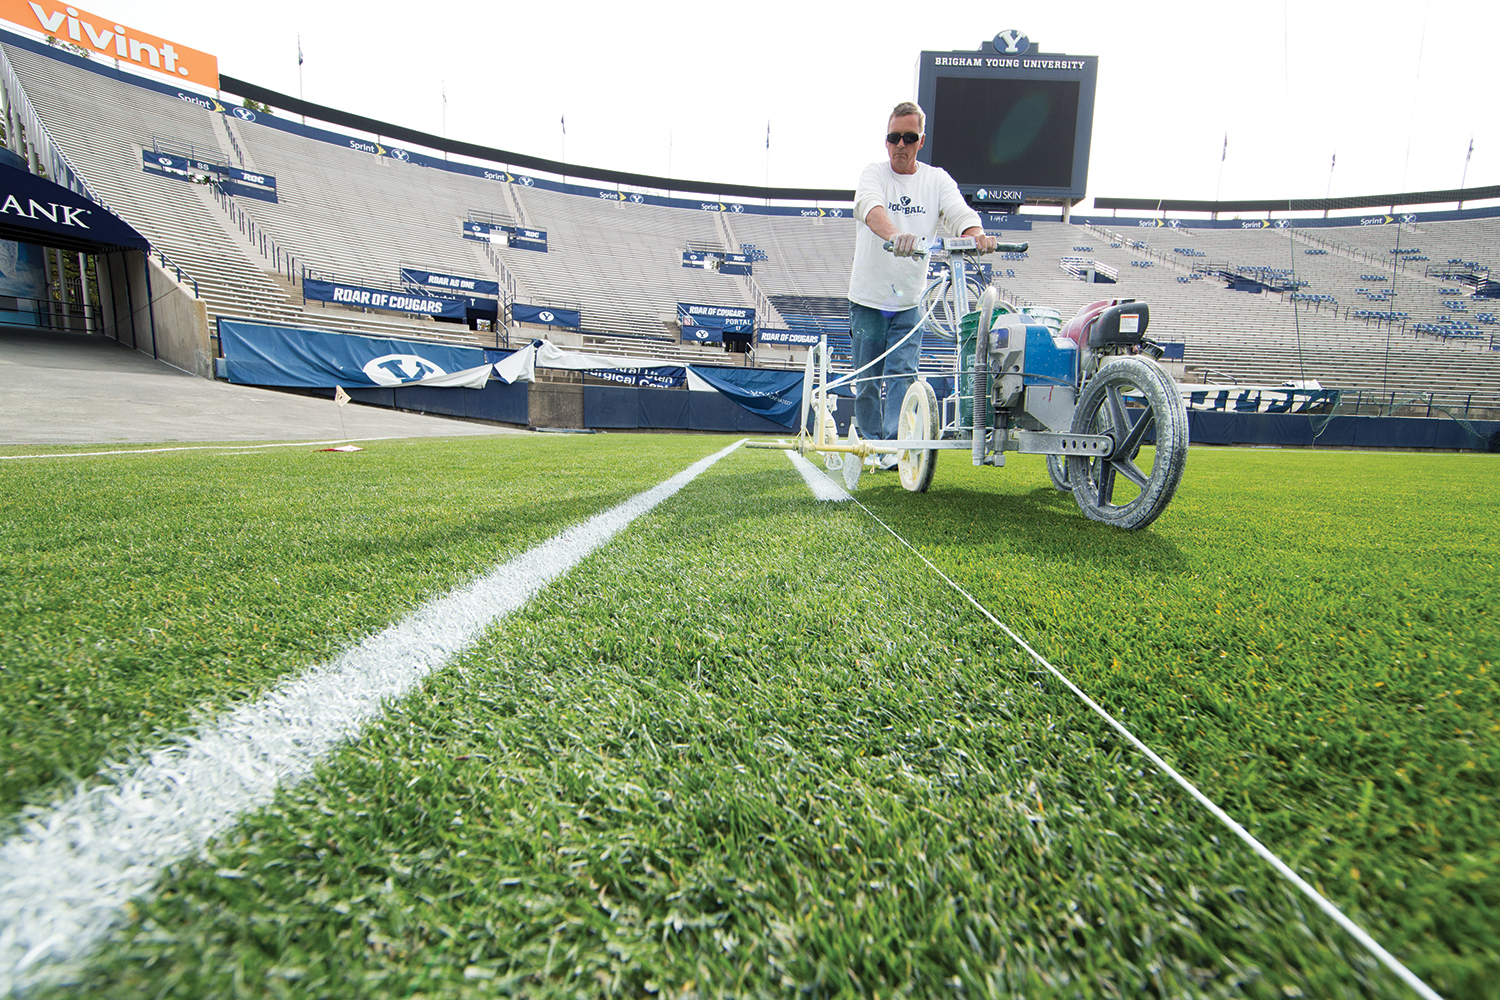 BYU employee Jon Quist prepares paints lines on the turf in preparation for an upcoming football game.